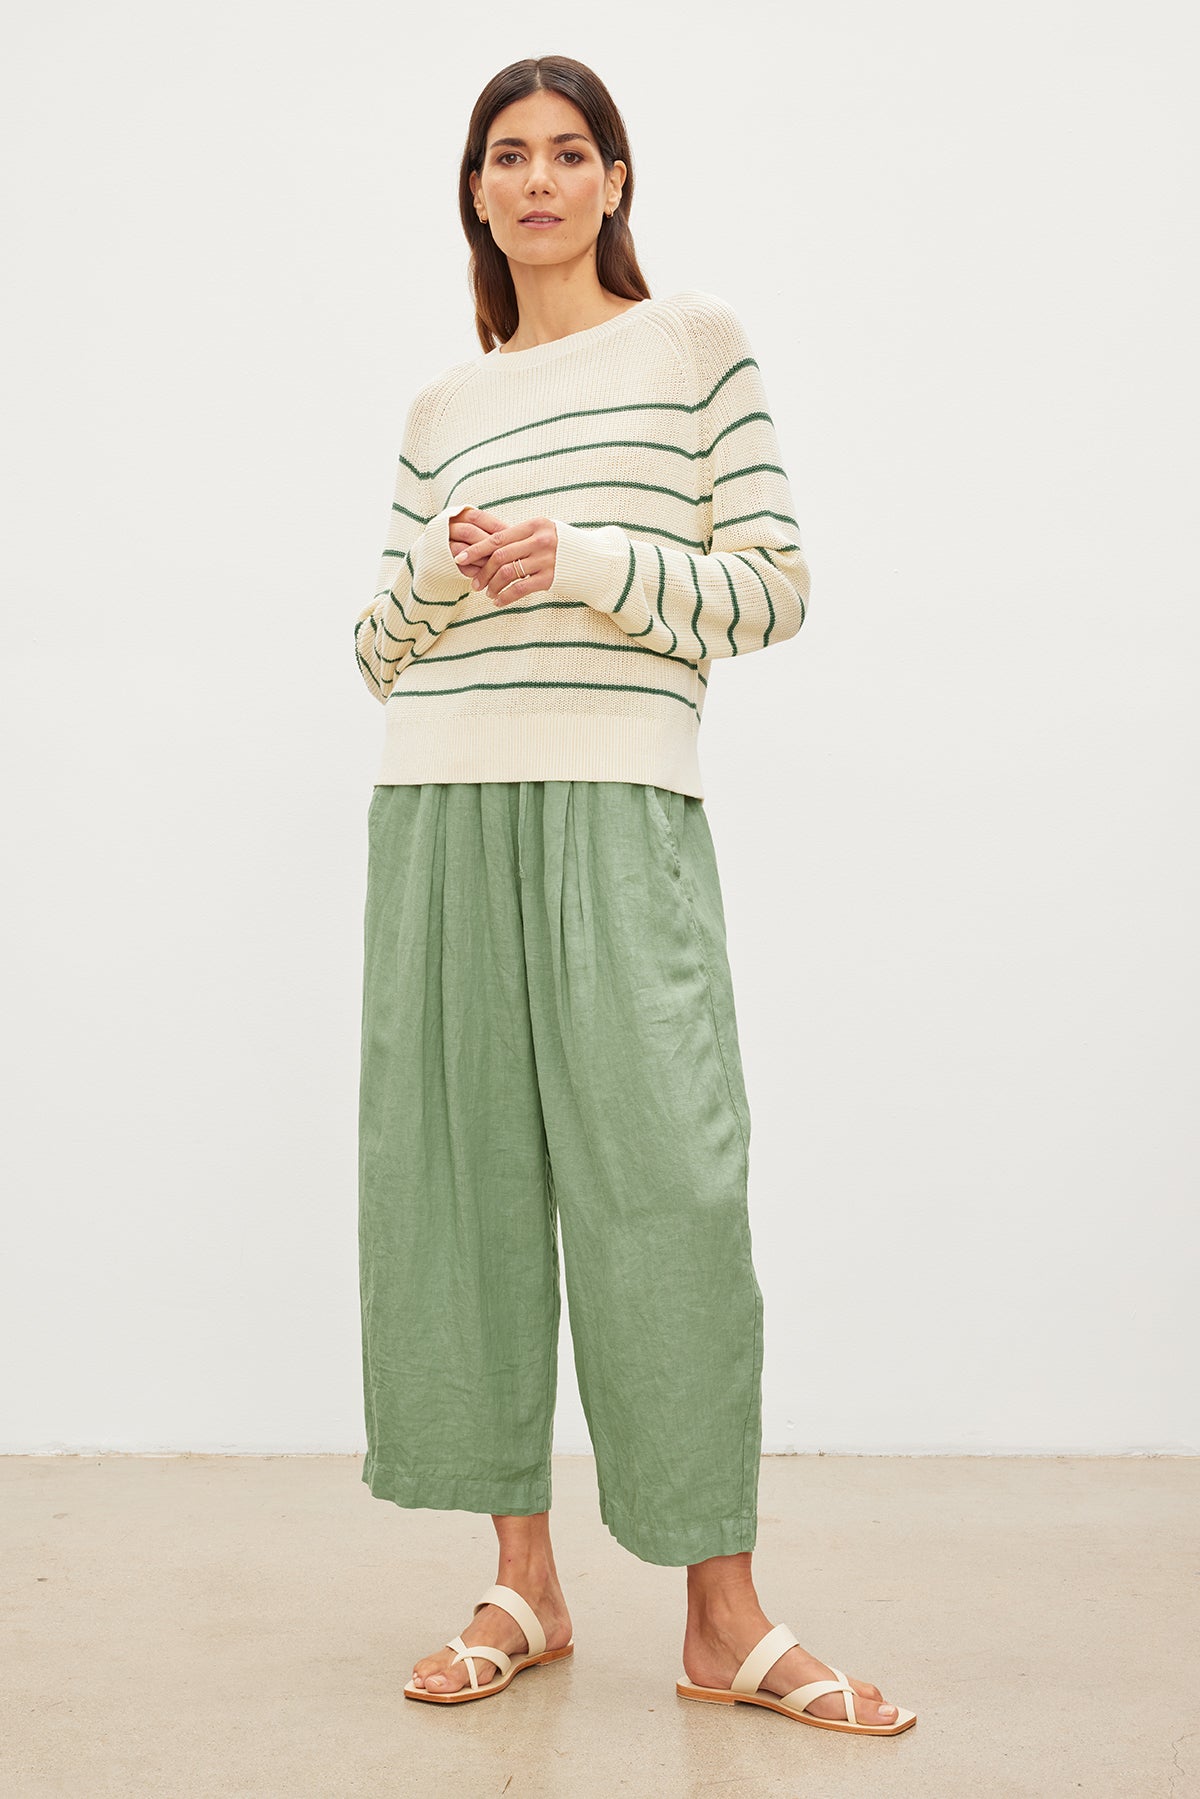 The model is wearing a CHAYSE STRIPED CREW NECK SWEATER by Velvet by Graham & Spencer in a relaxed silhouette and textured cotton culottes.-35955537150145